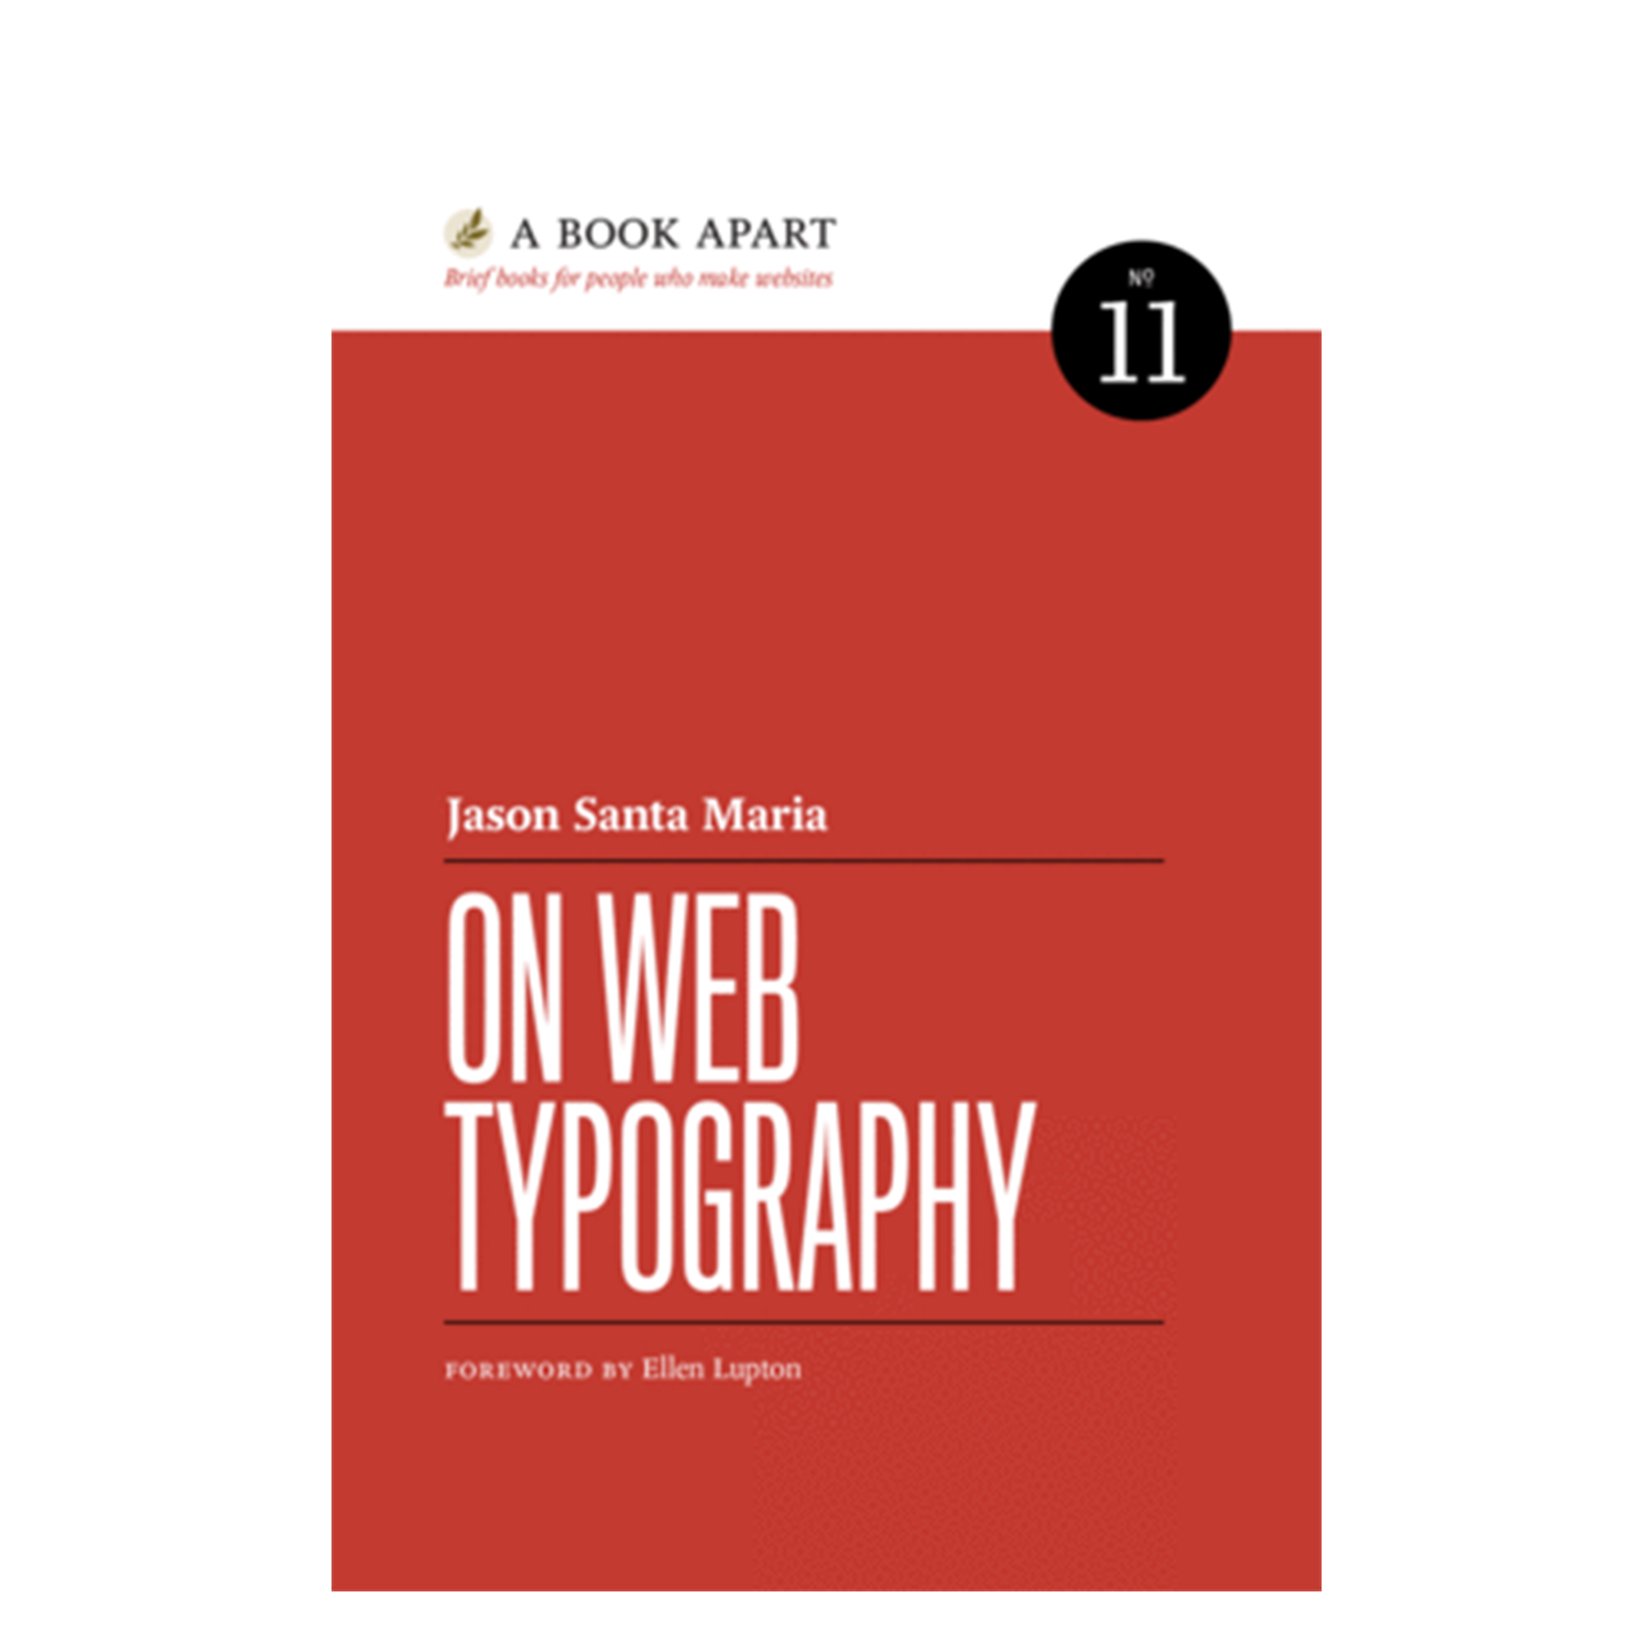 A Book Apart: On Web Typography (No. 11)